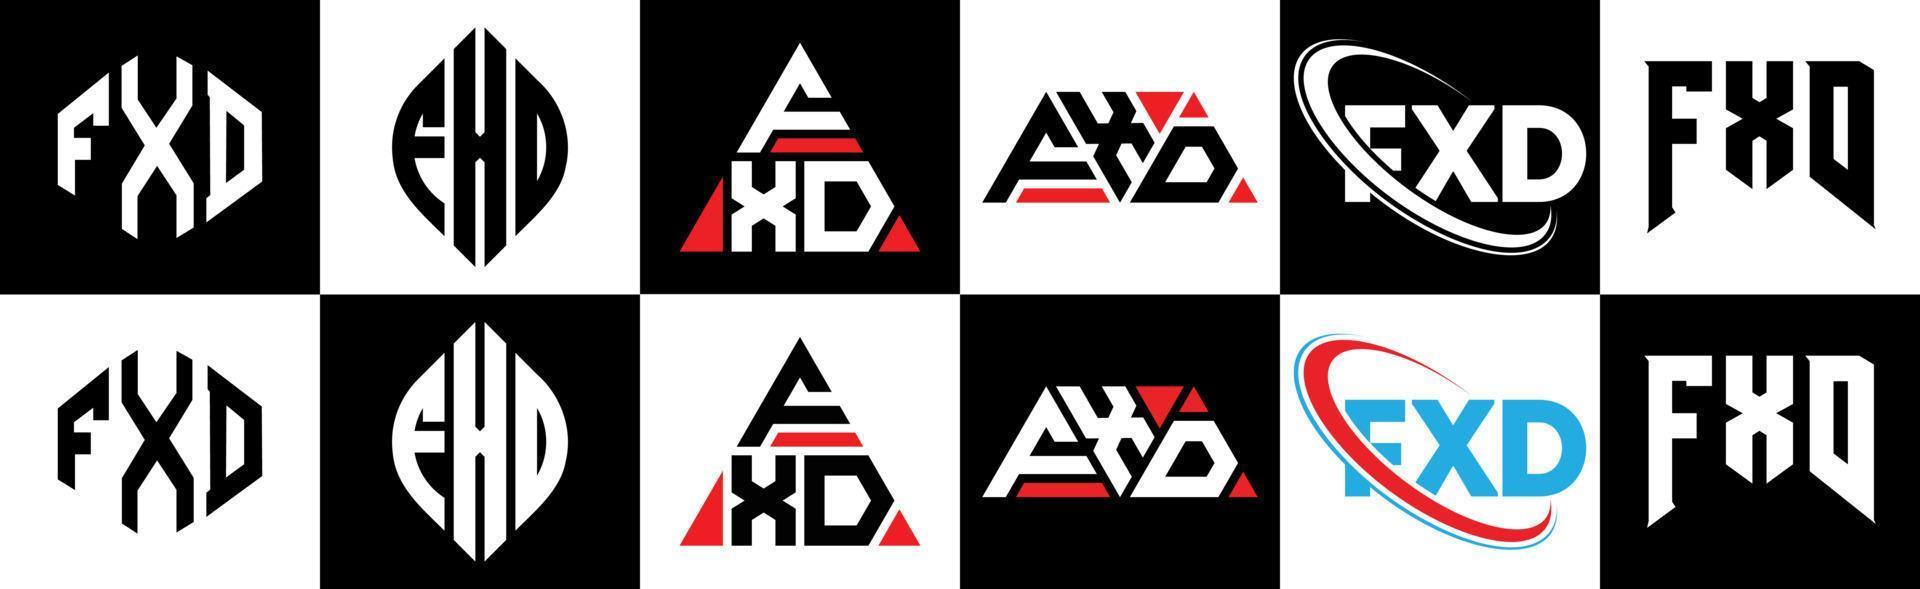 FXD letter logo design in six style. FXD polygon, circle, triangle, hexagon, flat and simple style with black and white color variation letter logo set in one artboard. FXD minimalist and classic logo vector